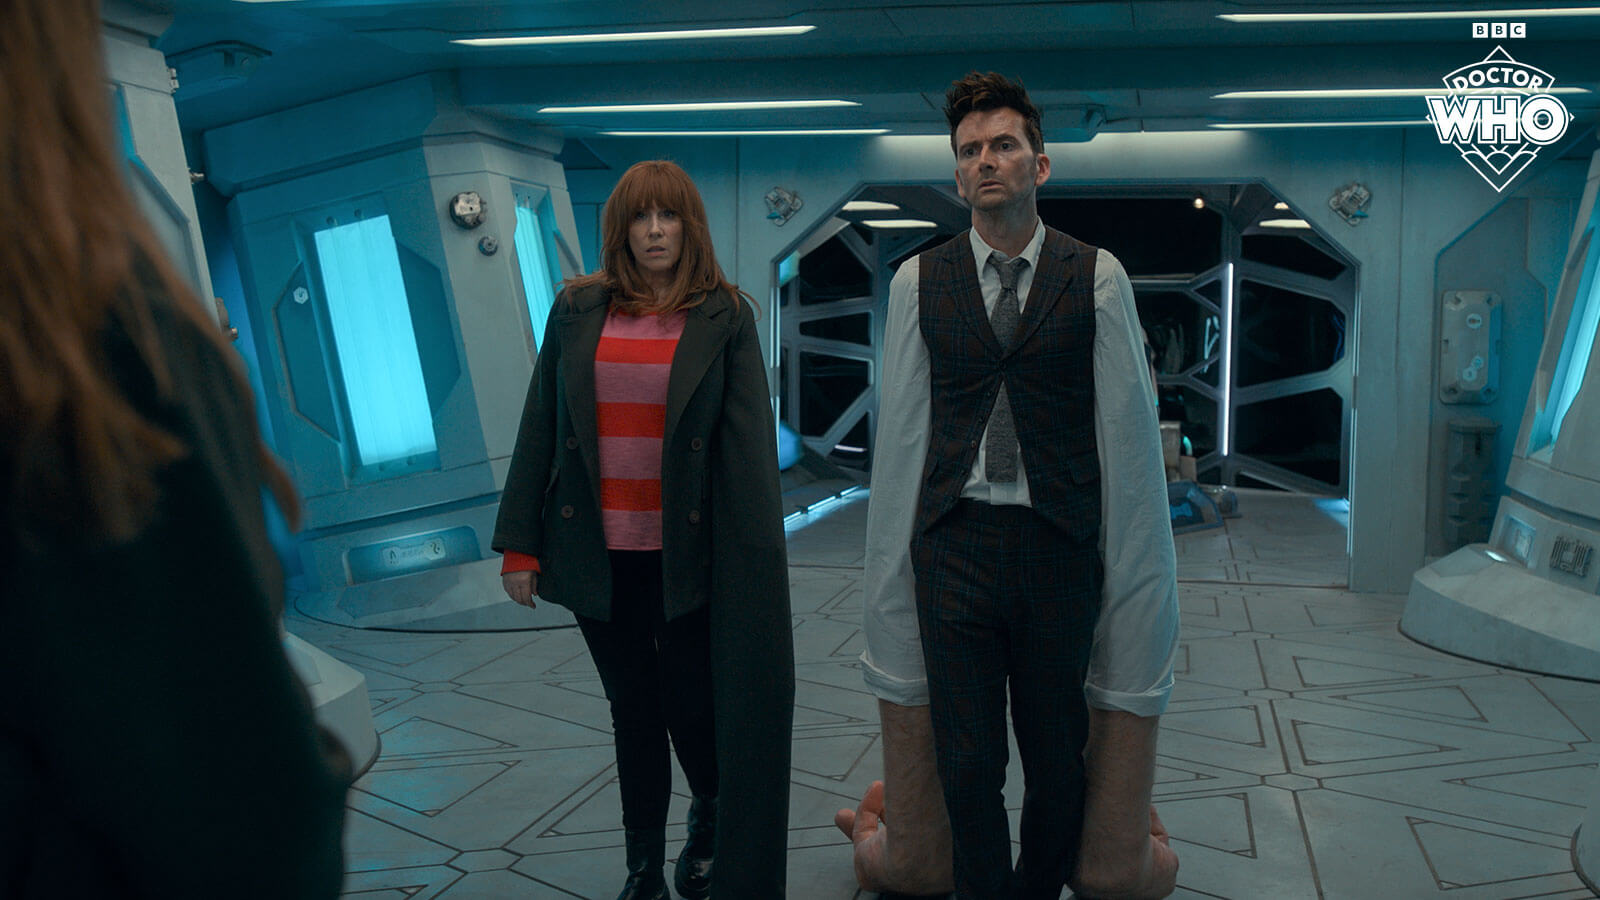 The Not-Things imitating the bodies of Donna Noble and the 14th Doctor